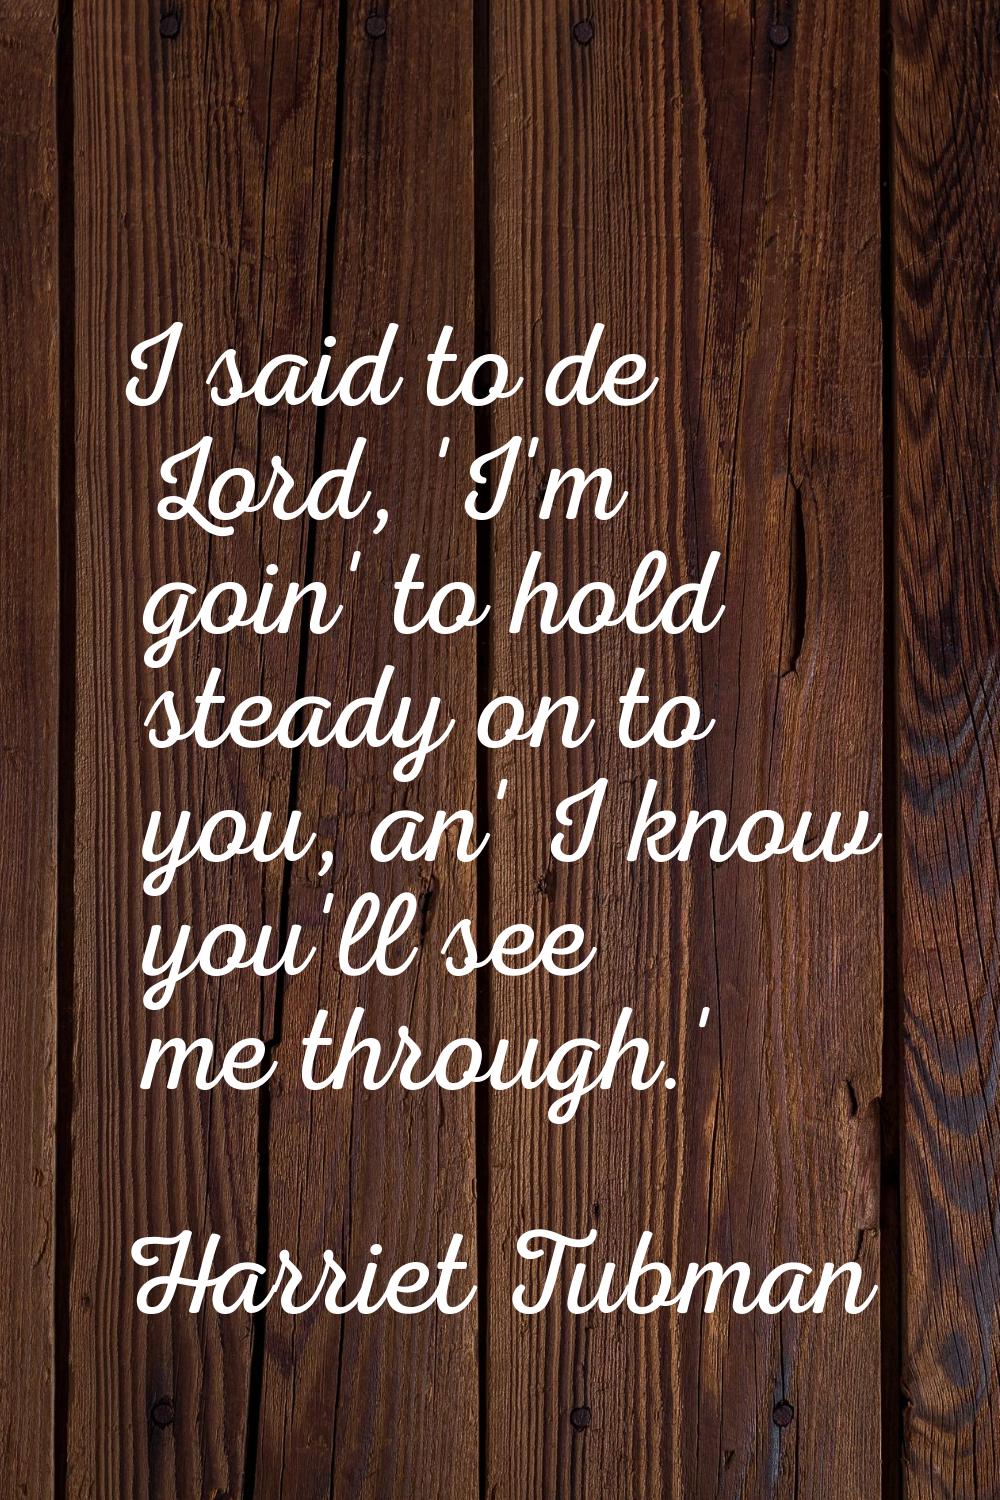 I said to de Lord, 'I'm goin' to hold steady on to you, an' I know you'll see me through.'